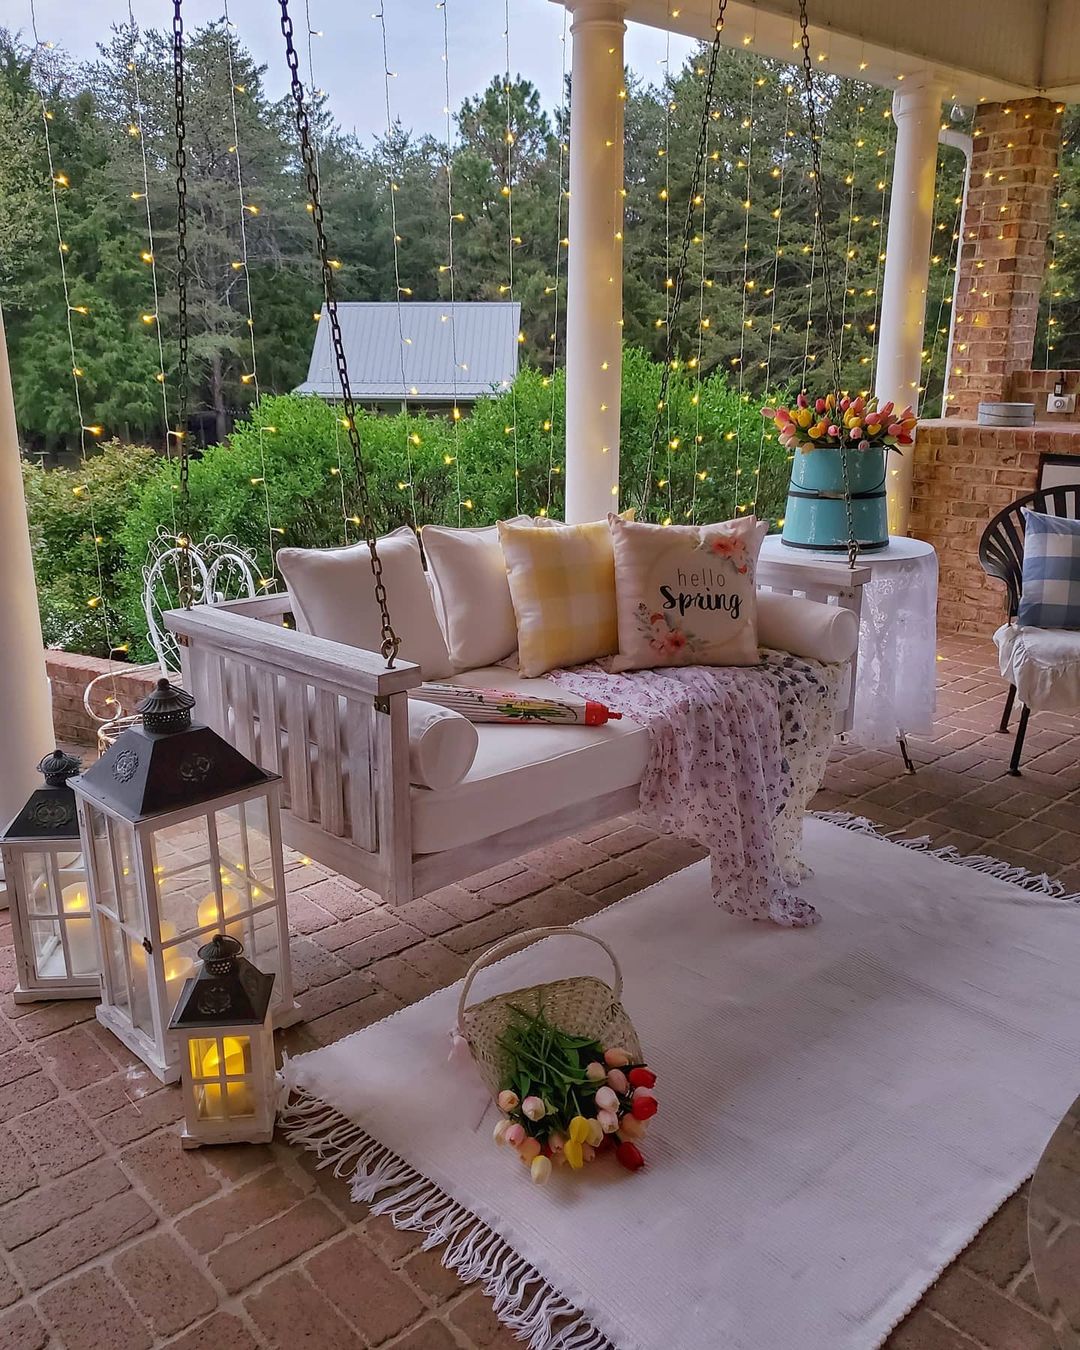 Outdoor Covered Patio with a Hanging Chair. Photo by Instagram user @happydaysfarm